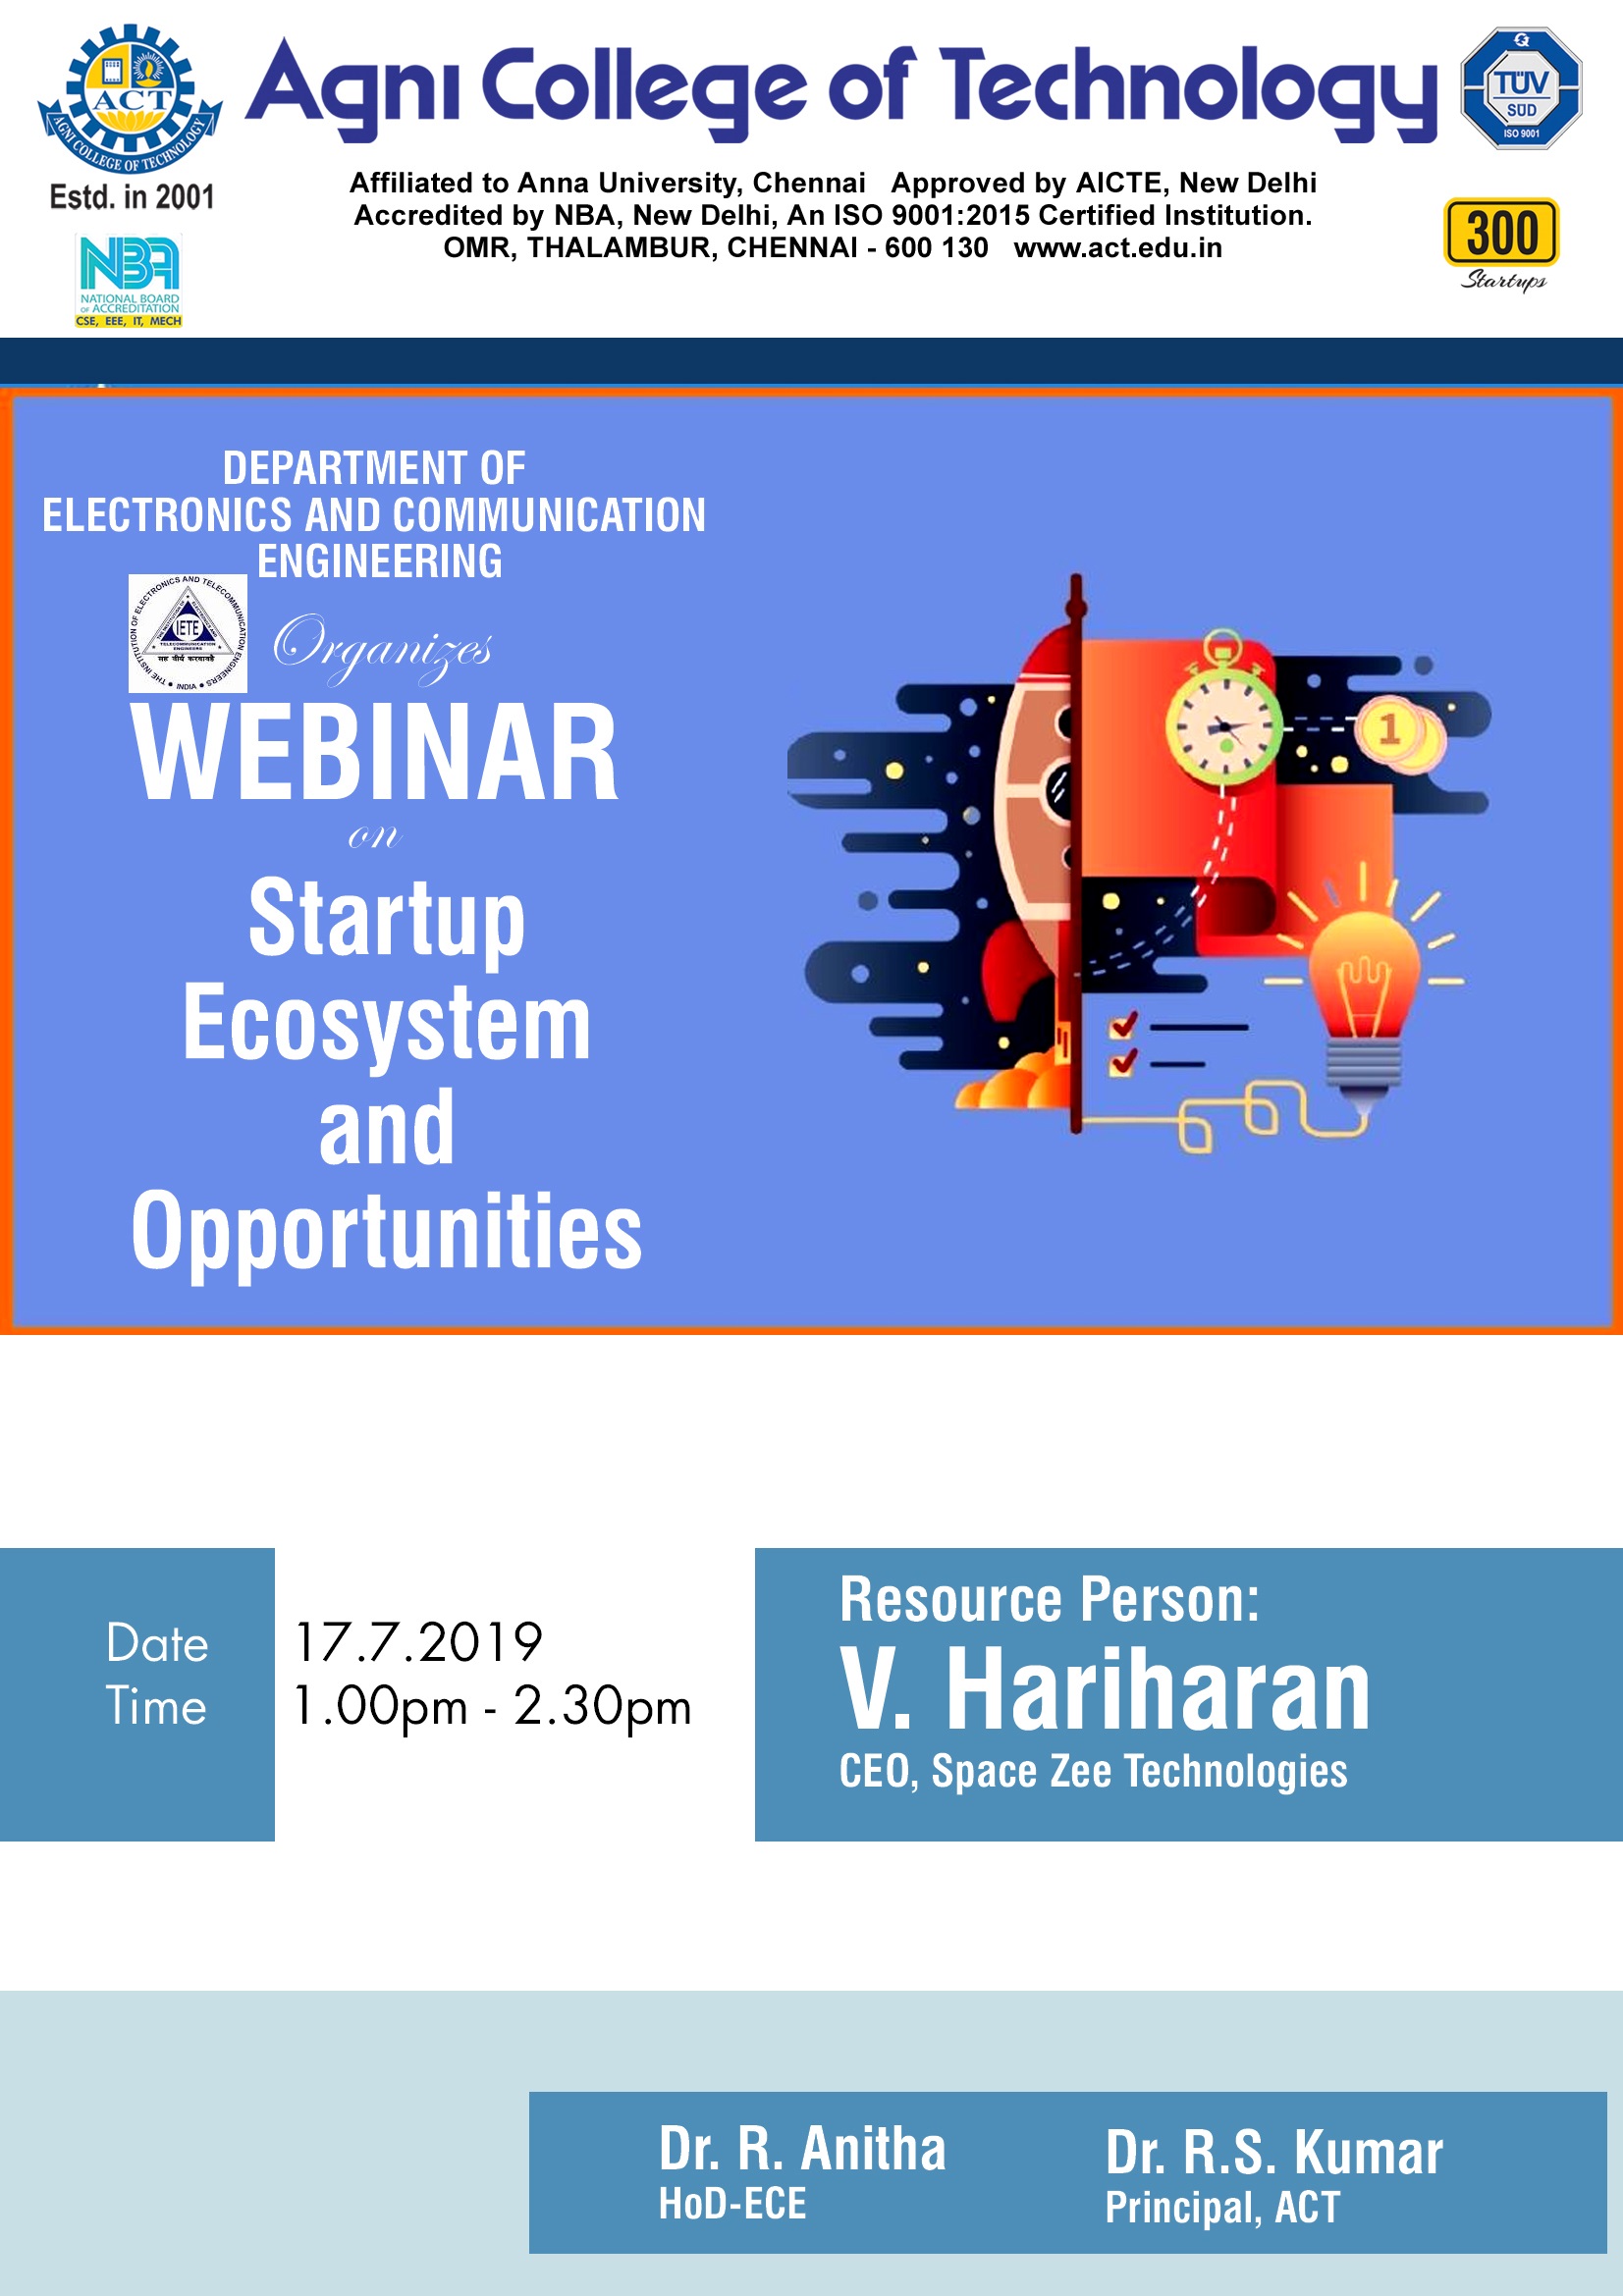 Webinar on Startup Ecosystem and Opportunities